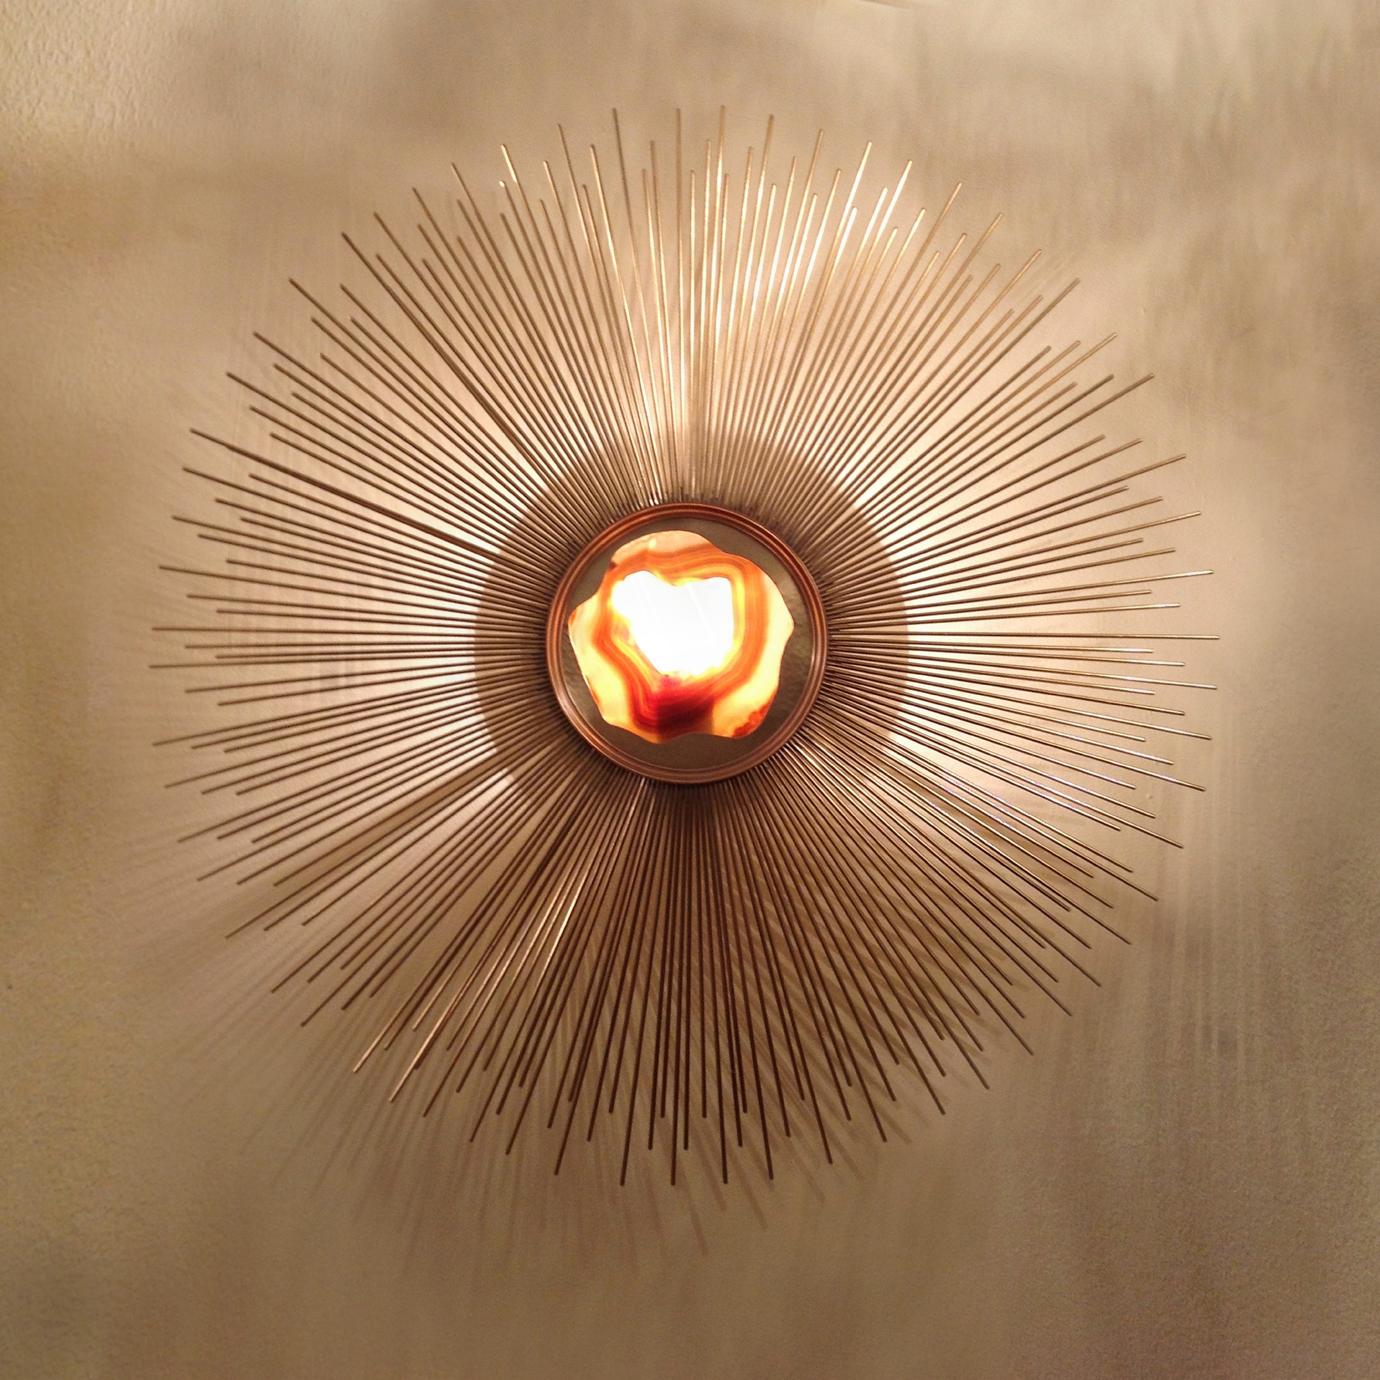 Tantalizing tones and exquisite patterns in the agate stones are cast onto rays of metal giving this sconce show stopping qualities. The hand selected agate stones come in a choice of colors and are thin enough to let the light trickle through,